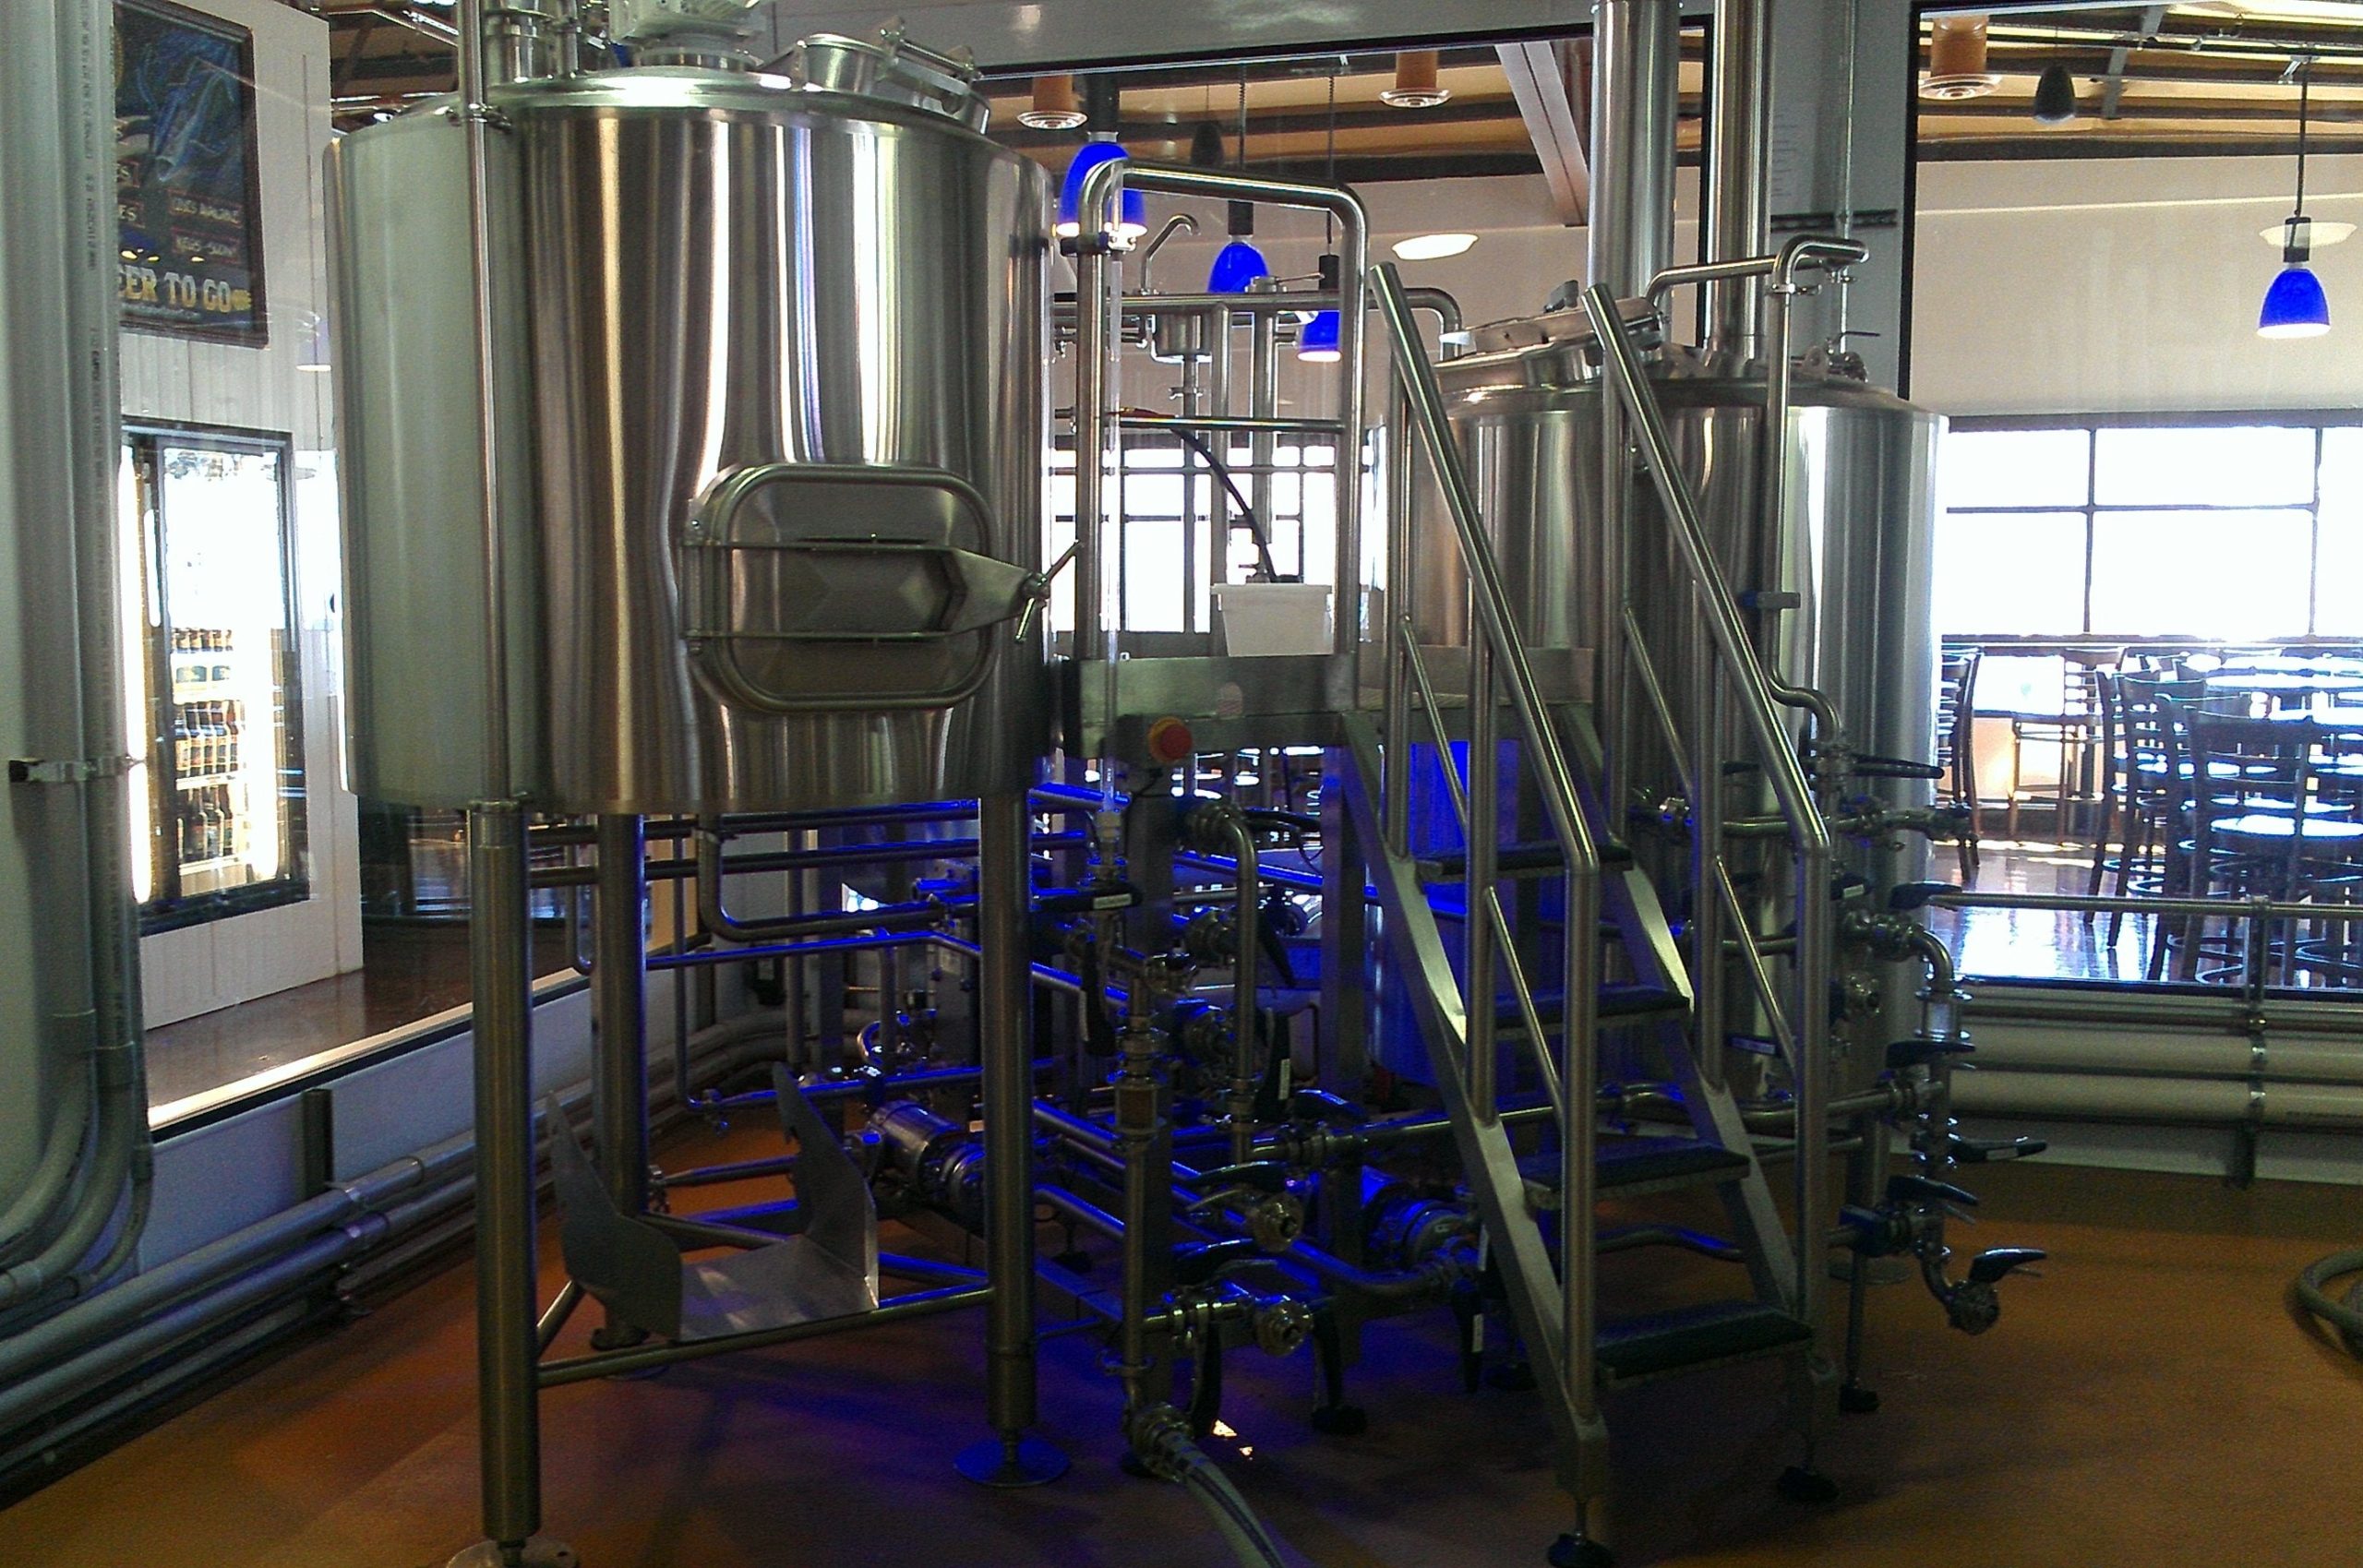 yep, this long legged 4BBL brewhouse has tricked out low rider lights under the brew platform.